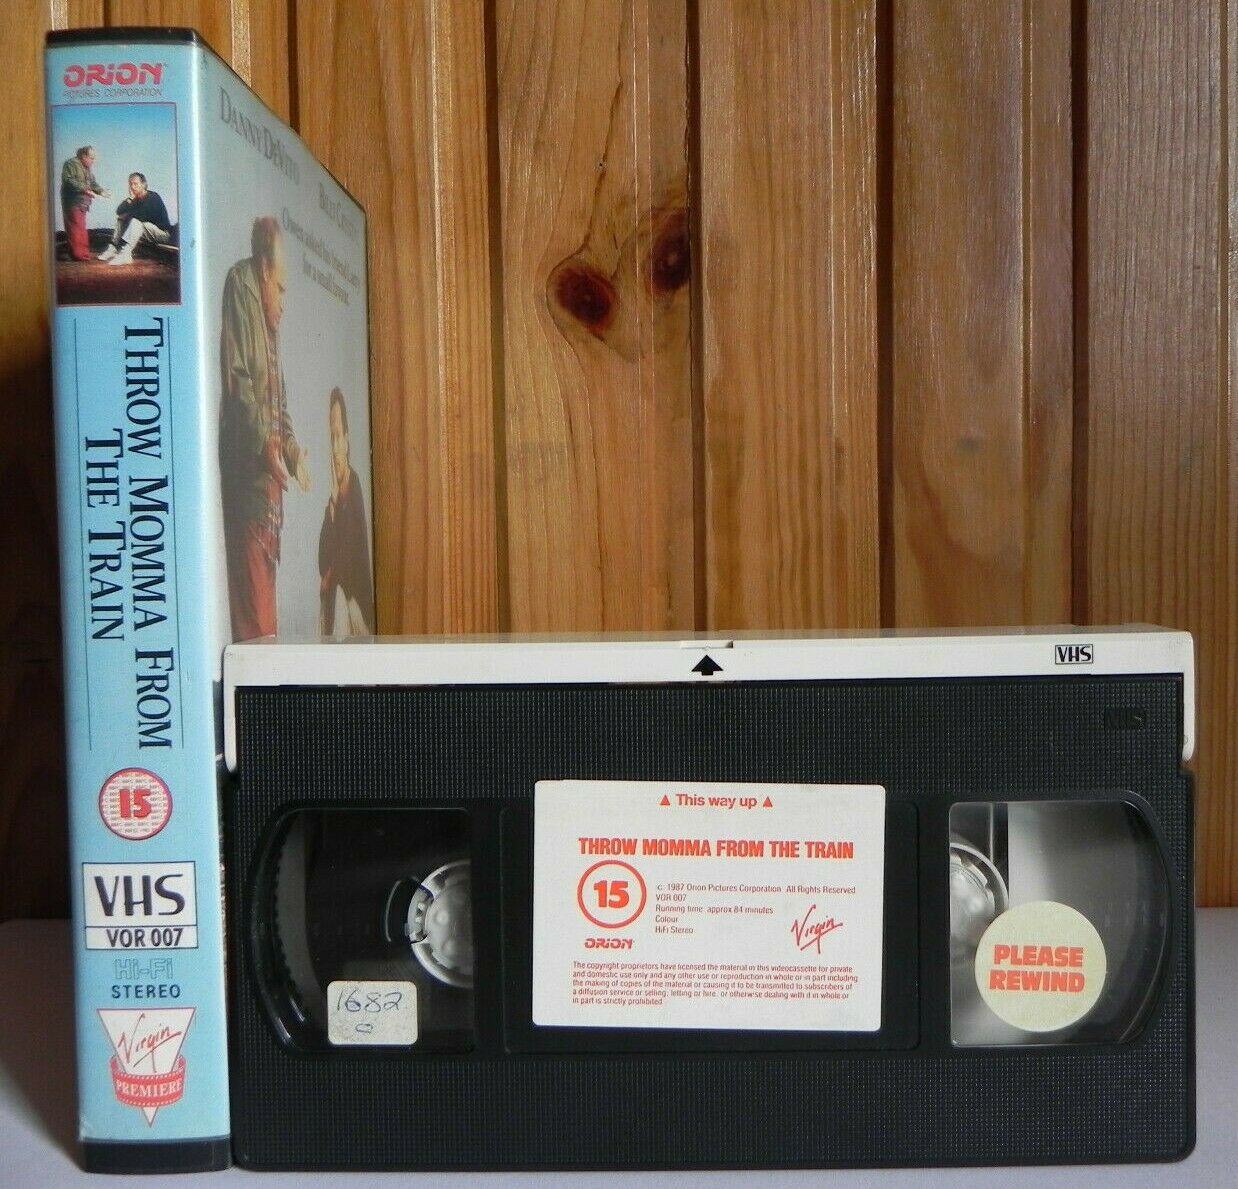 Throw Momma From The Train - Crystal - DeVito - Brilliant Comedy - Premiere VHS-